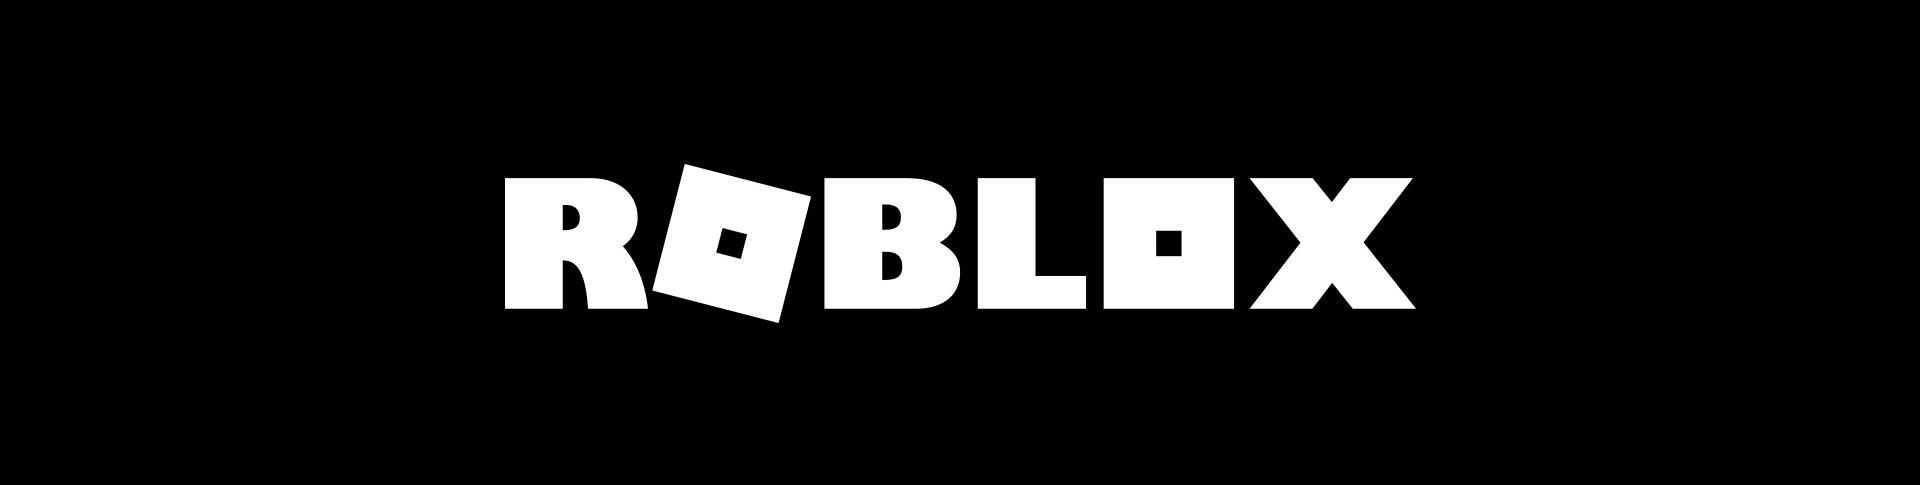 A Complete History Of The Roblox Logo Pocket Tactics - roblox 2006 logo old roblox icon